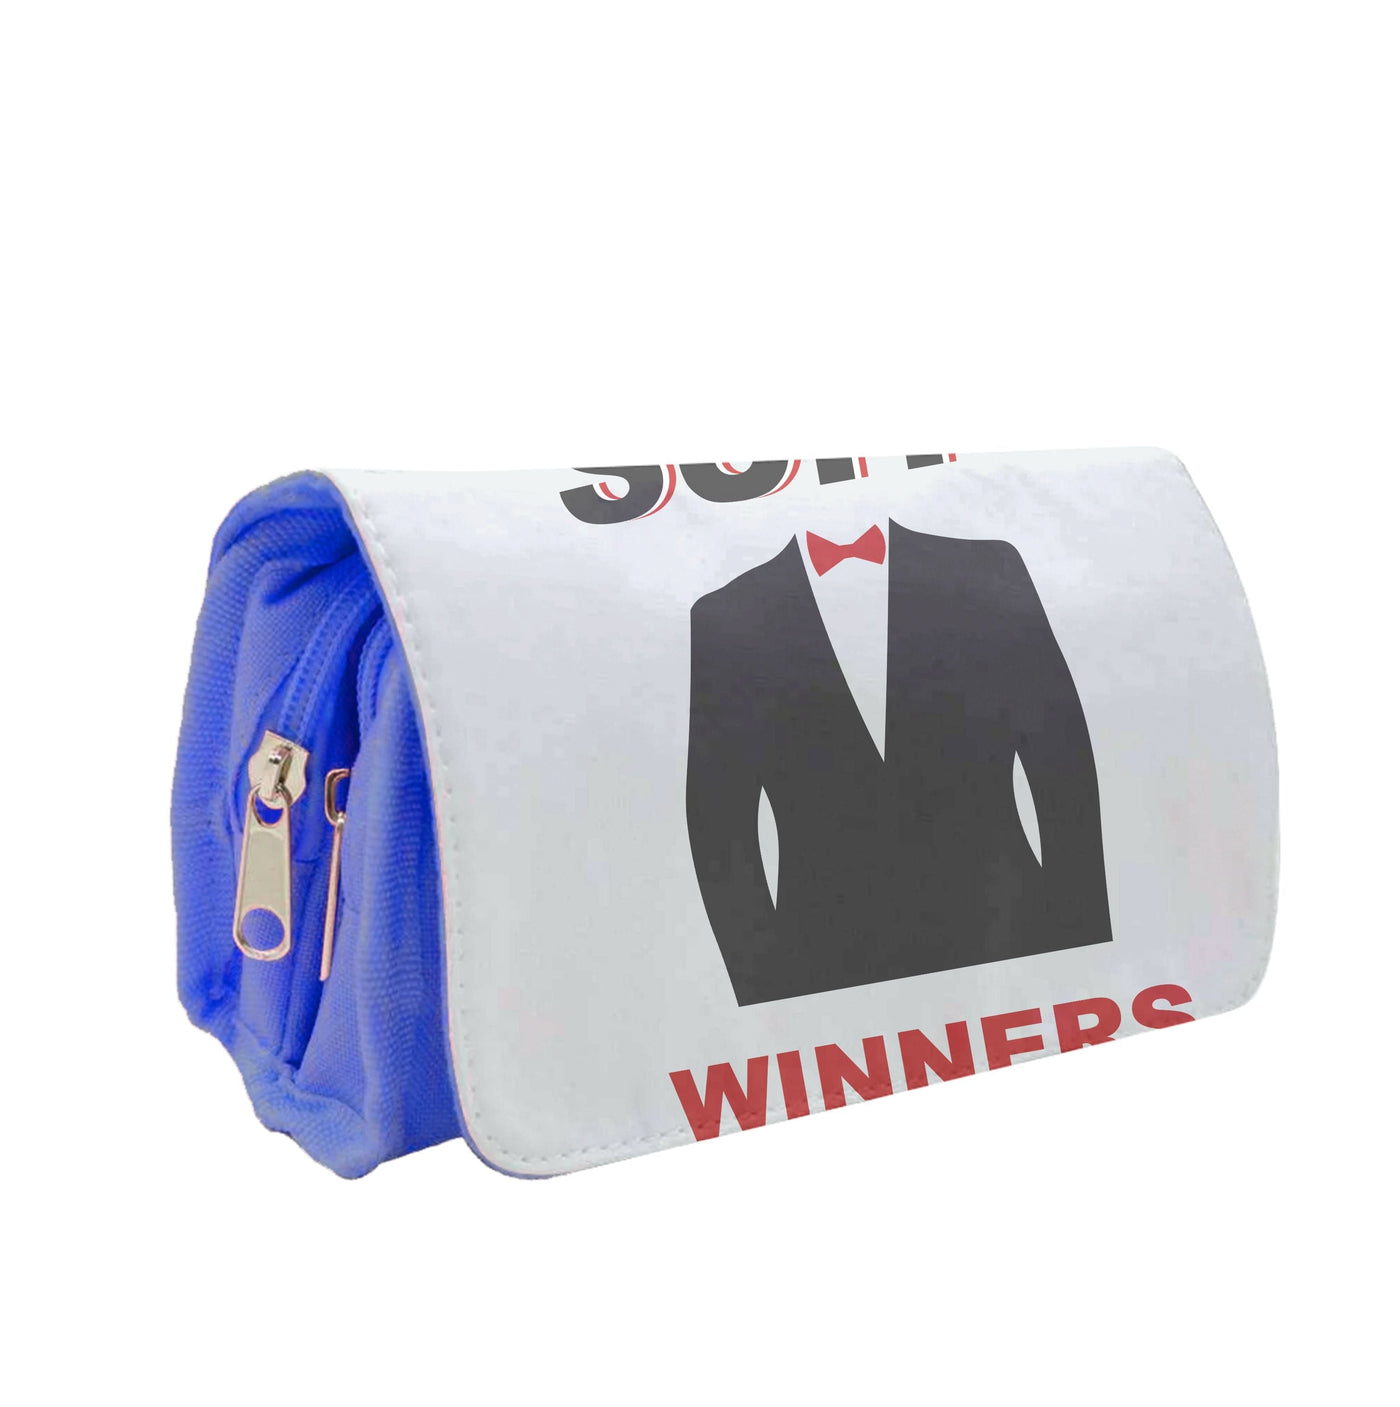 Winners Don't Make Excuses - Suits Pencil Case